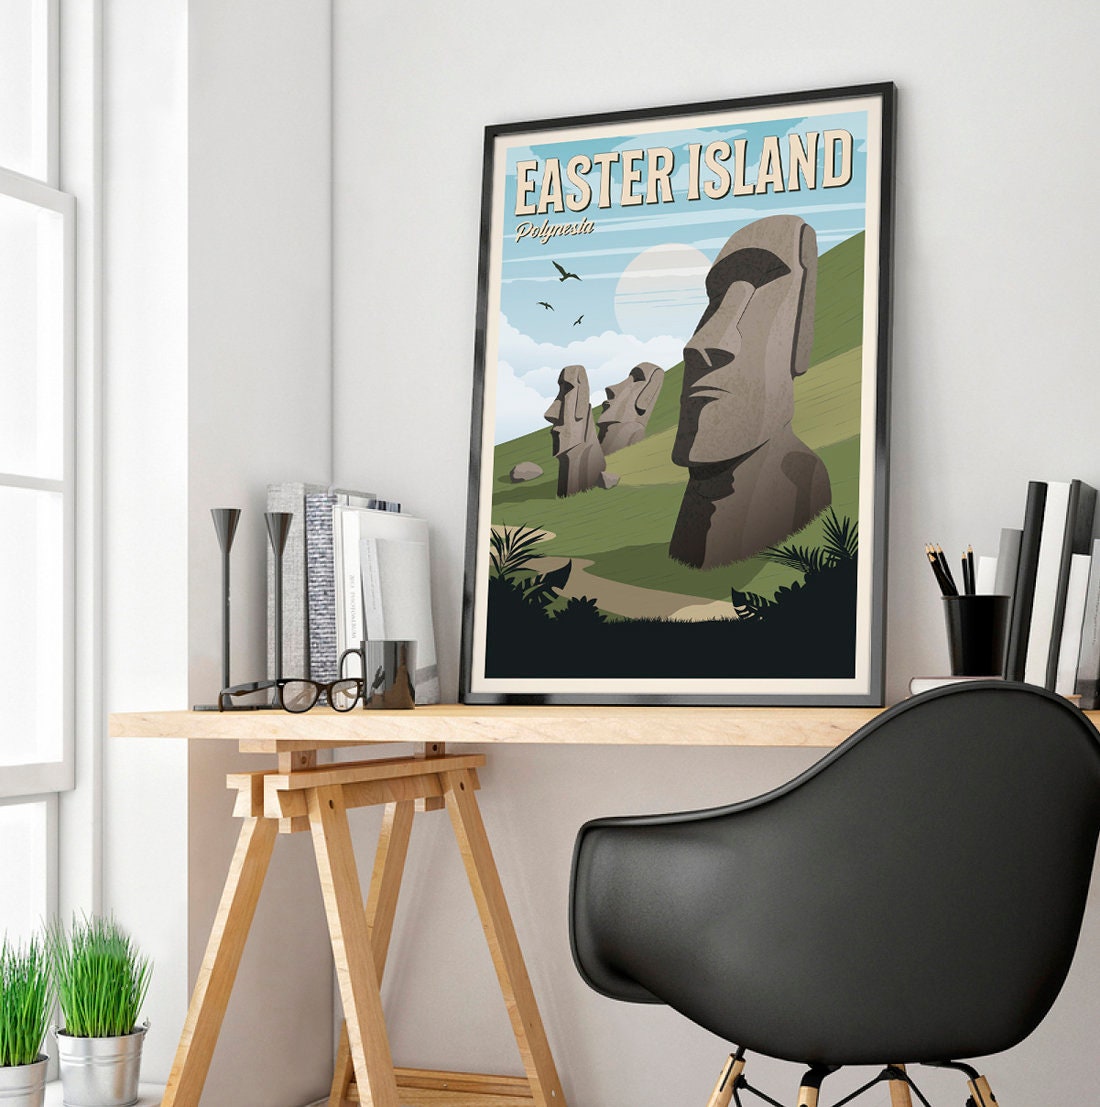 easter island travel poster